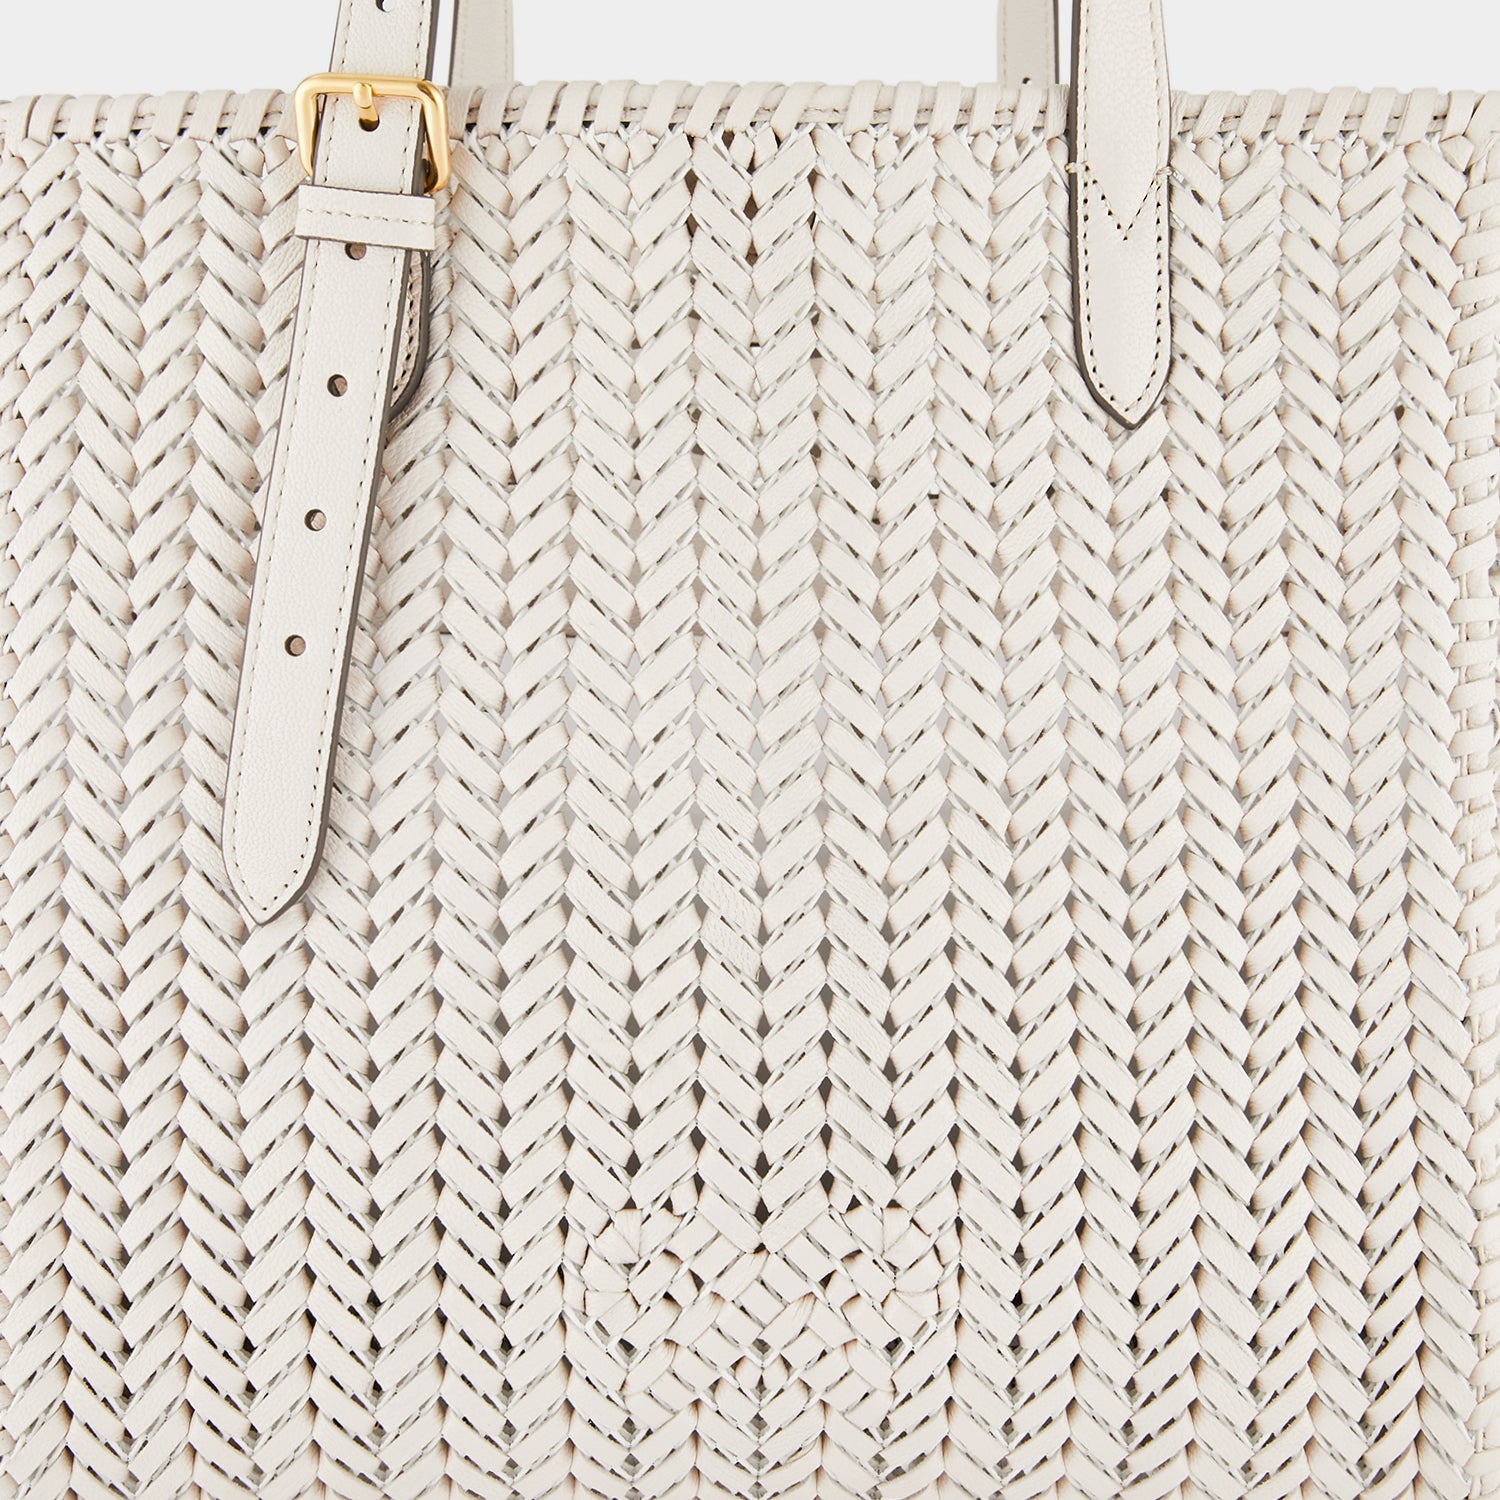 Neeson Square Tote -

                  
                    Capra Leather in Chalk -
                  

                  Anya Hindmarch UK
